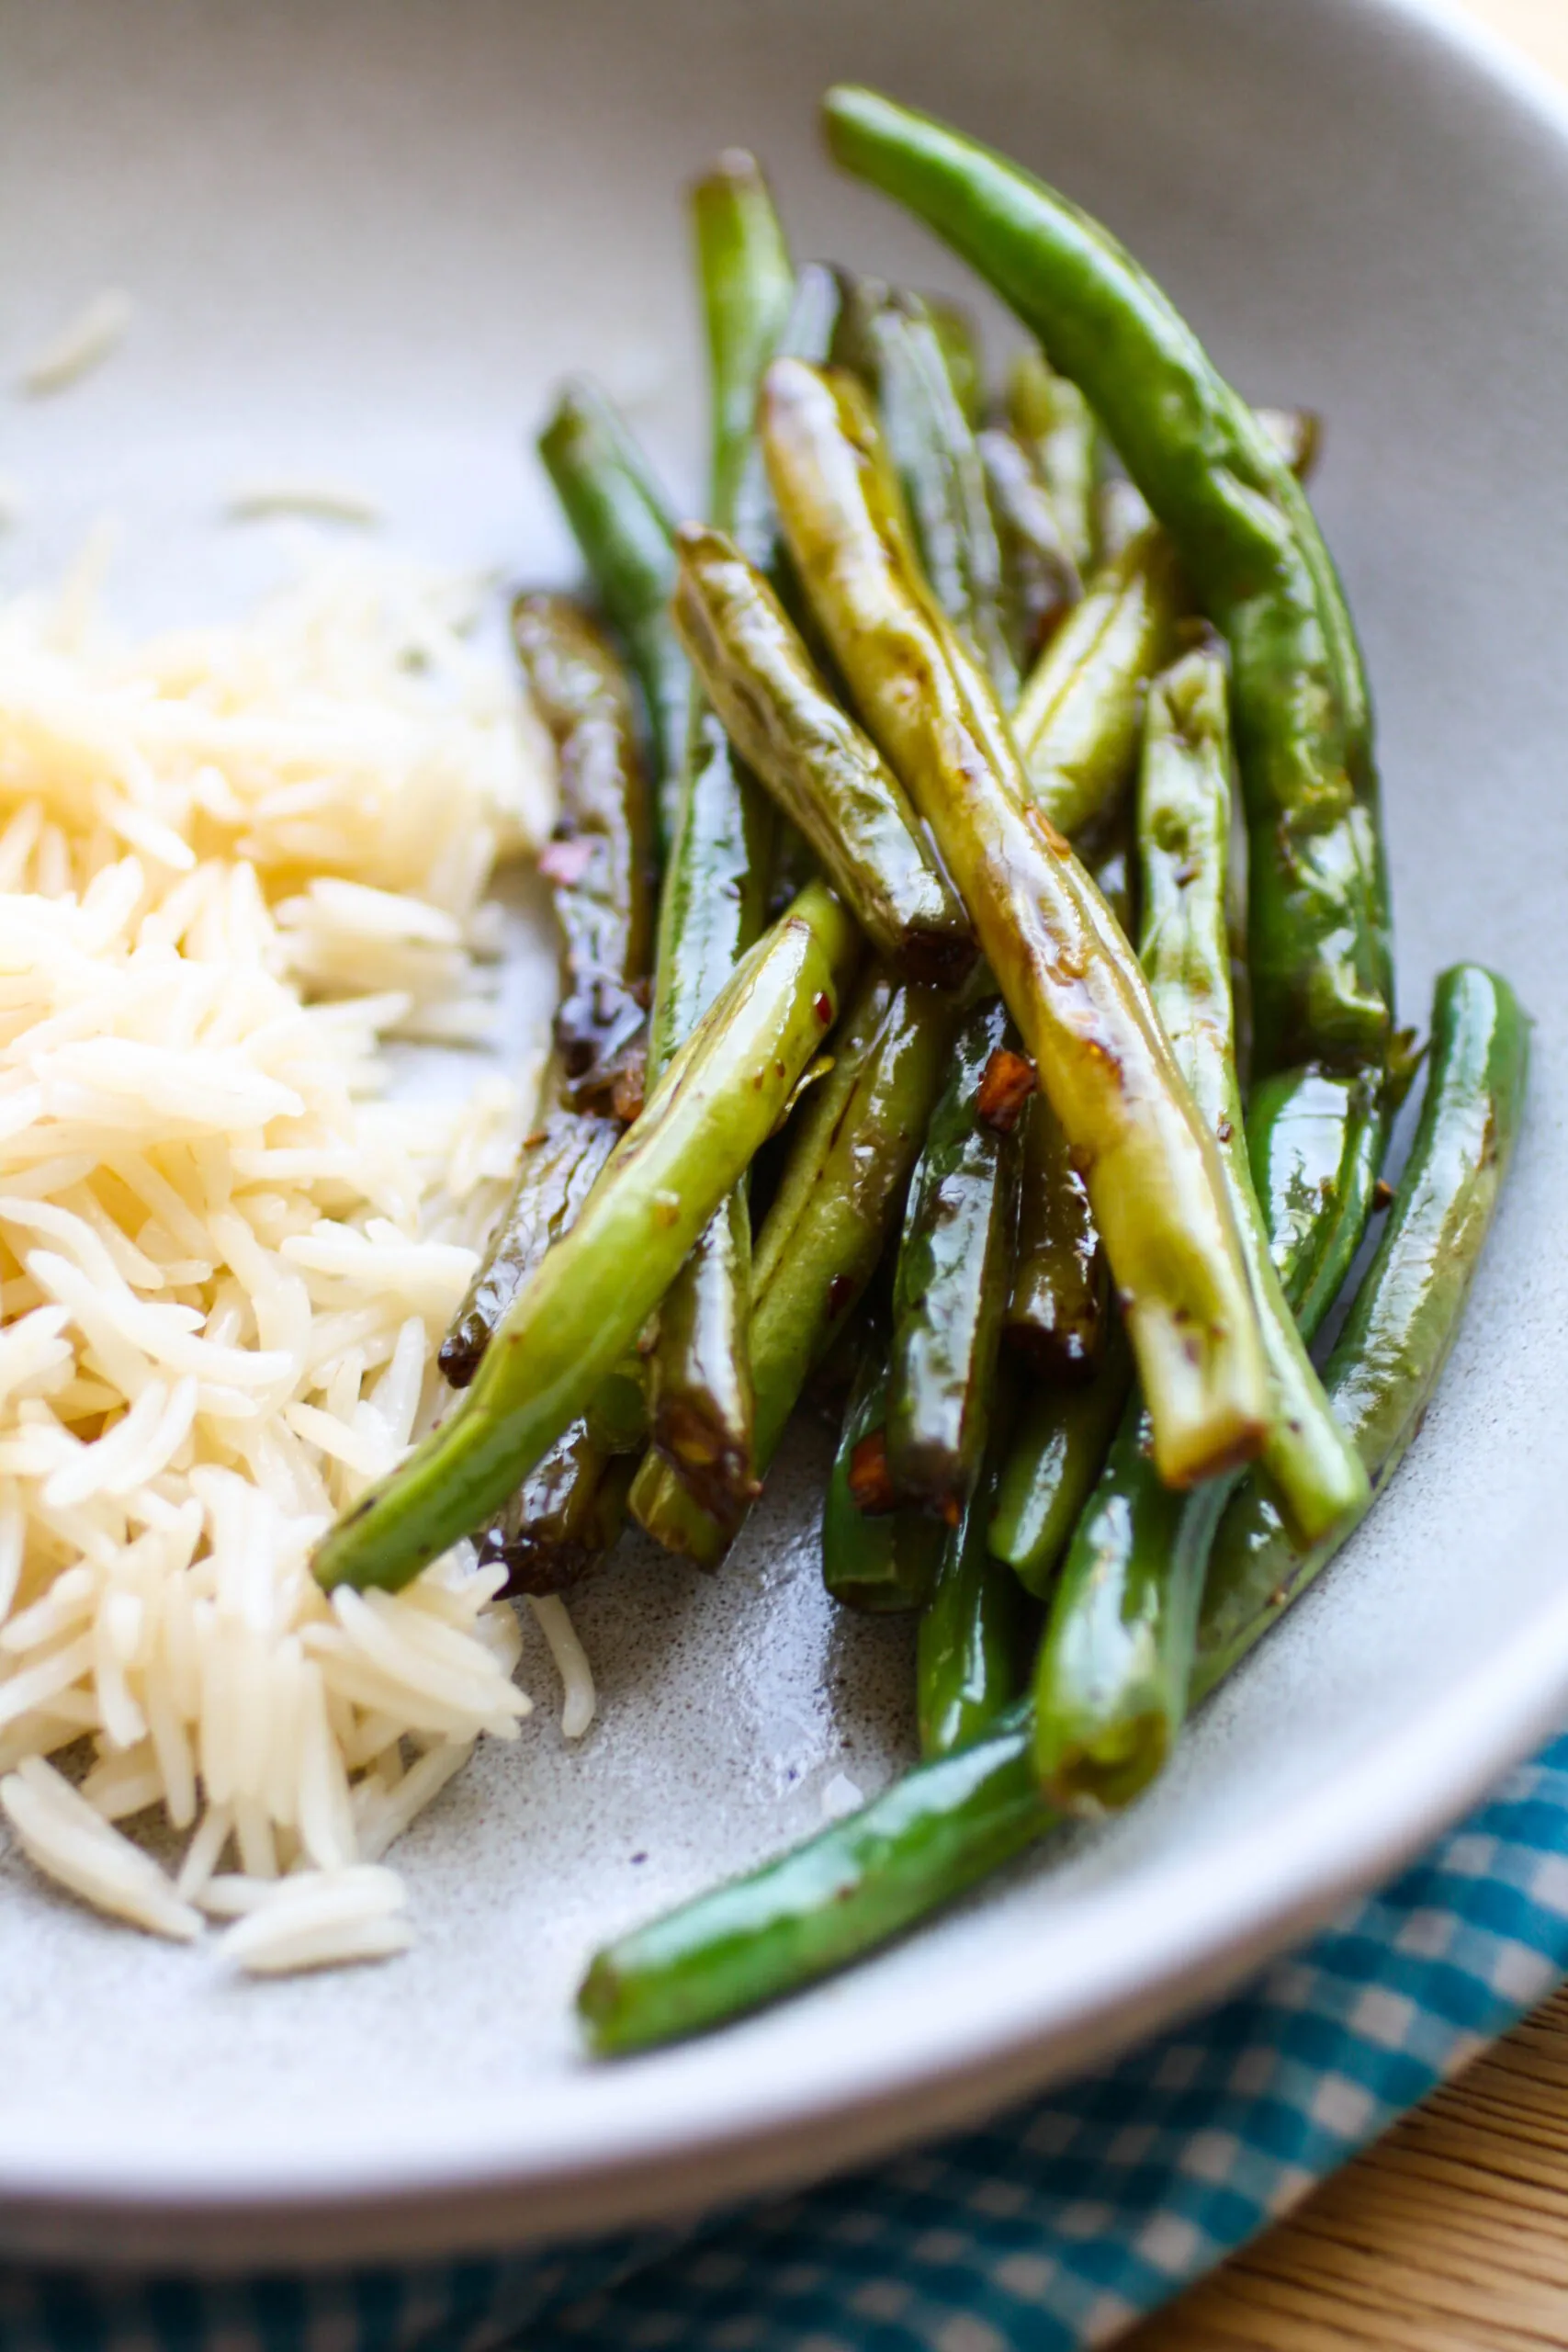 Balsamic green beans are ideal as a side dish for just about anything!